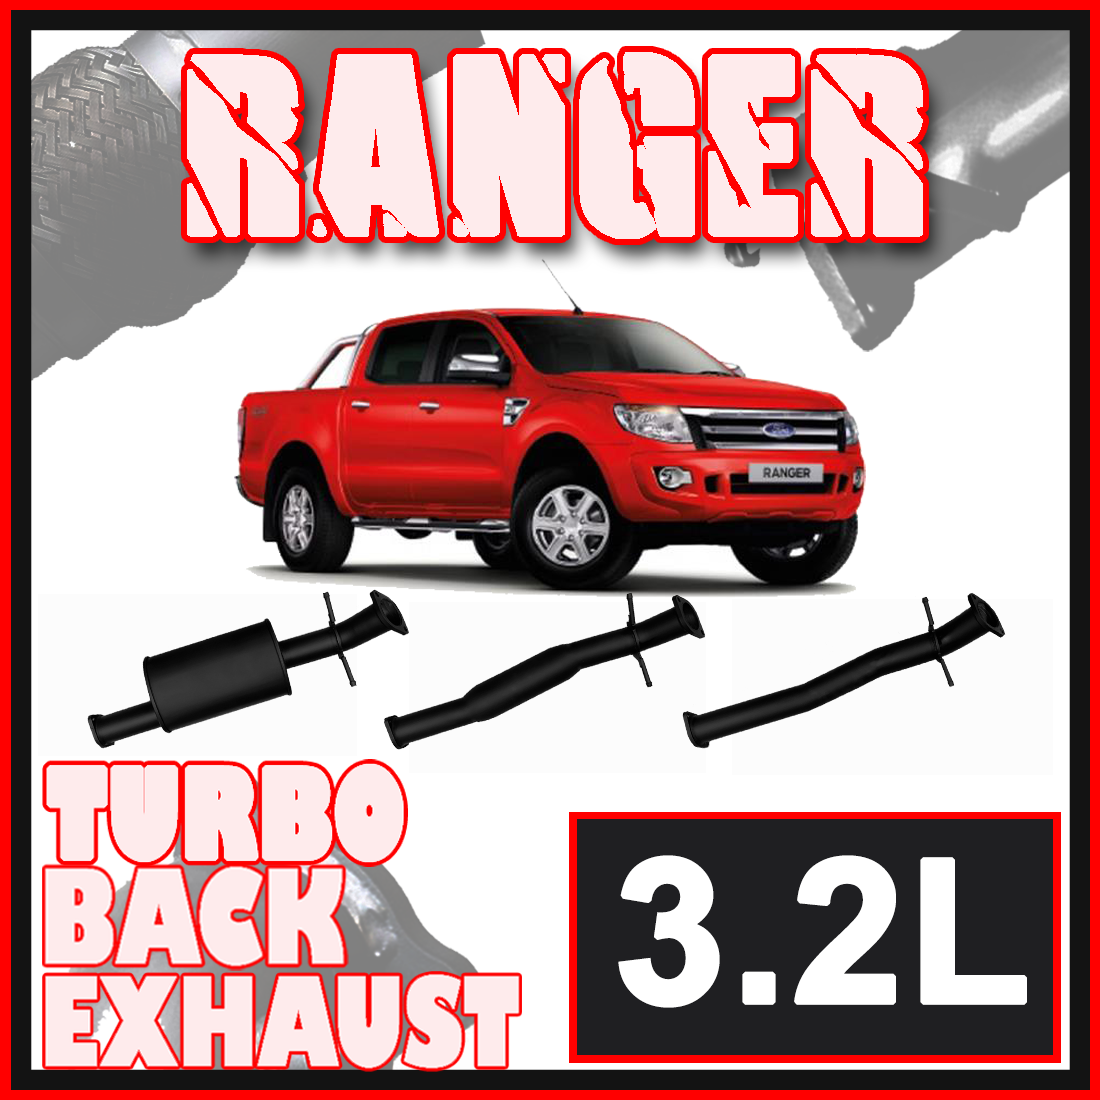 Ford PX Ranger Exhaust 3.2L 3 Inch Systems image